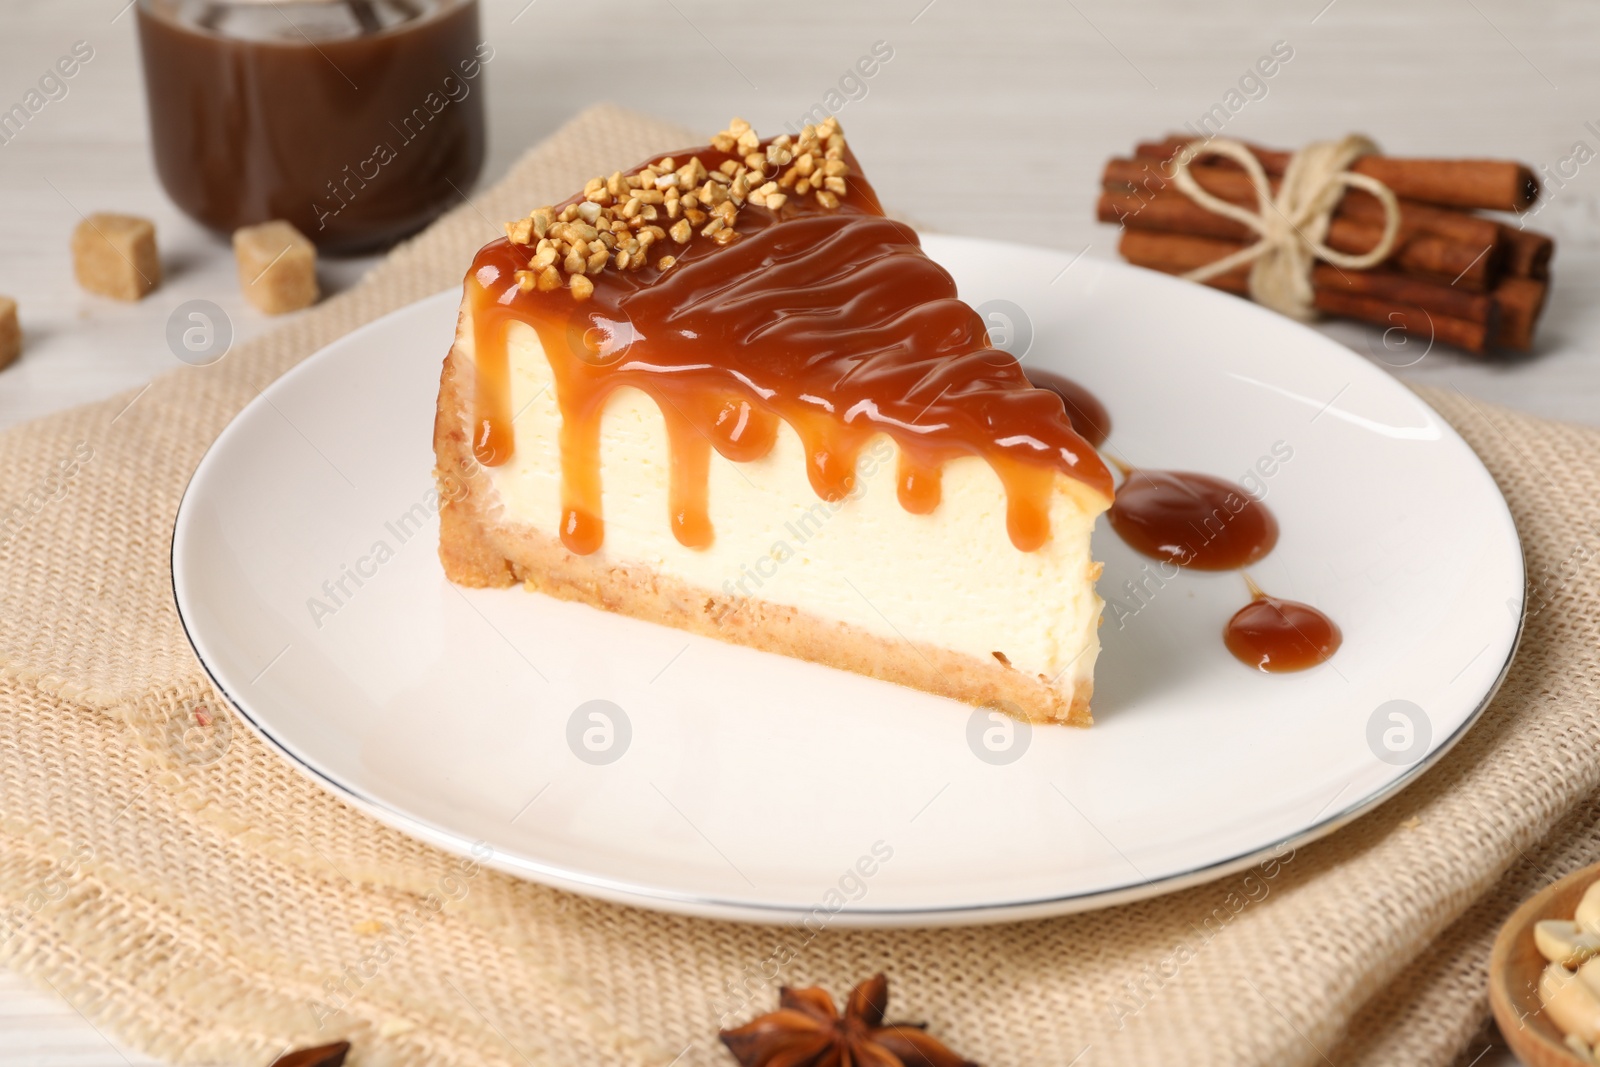 Photo of Tasty cheesecake with caramel and nuts served on white table